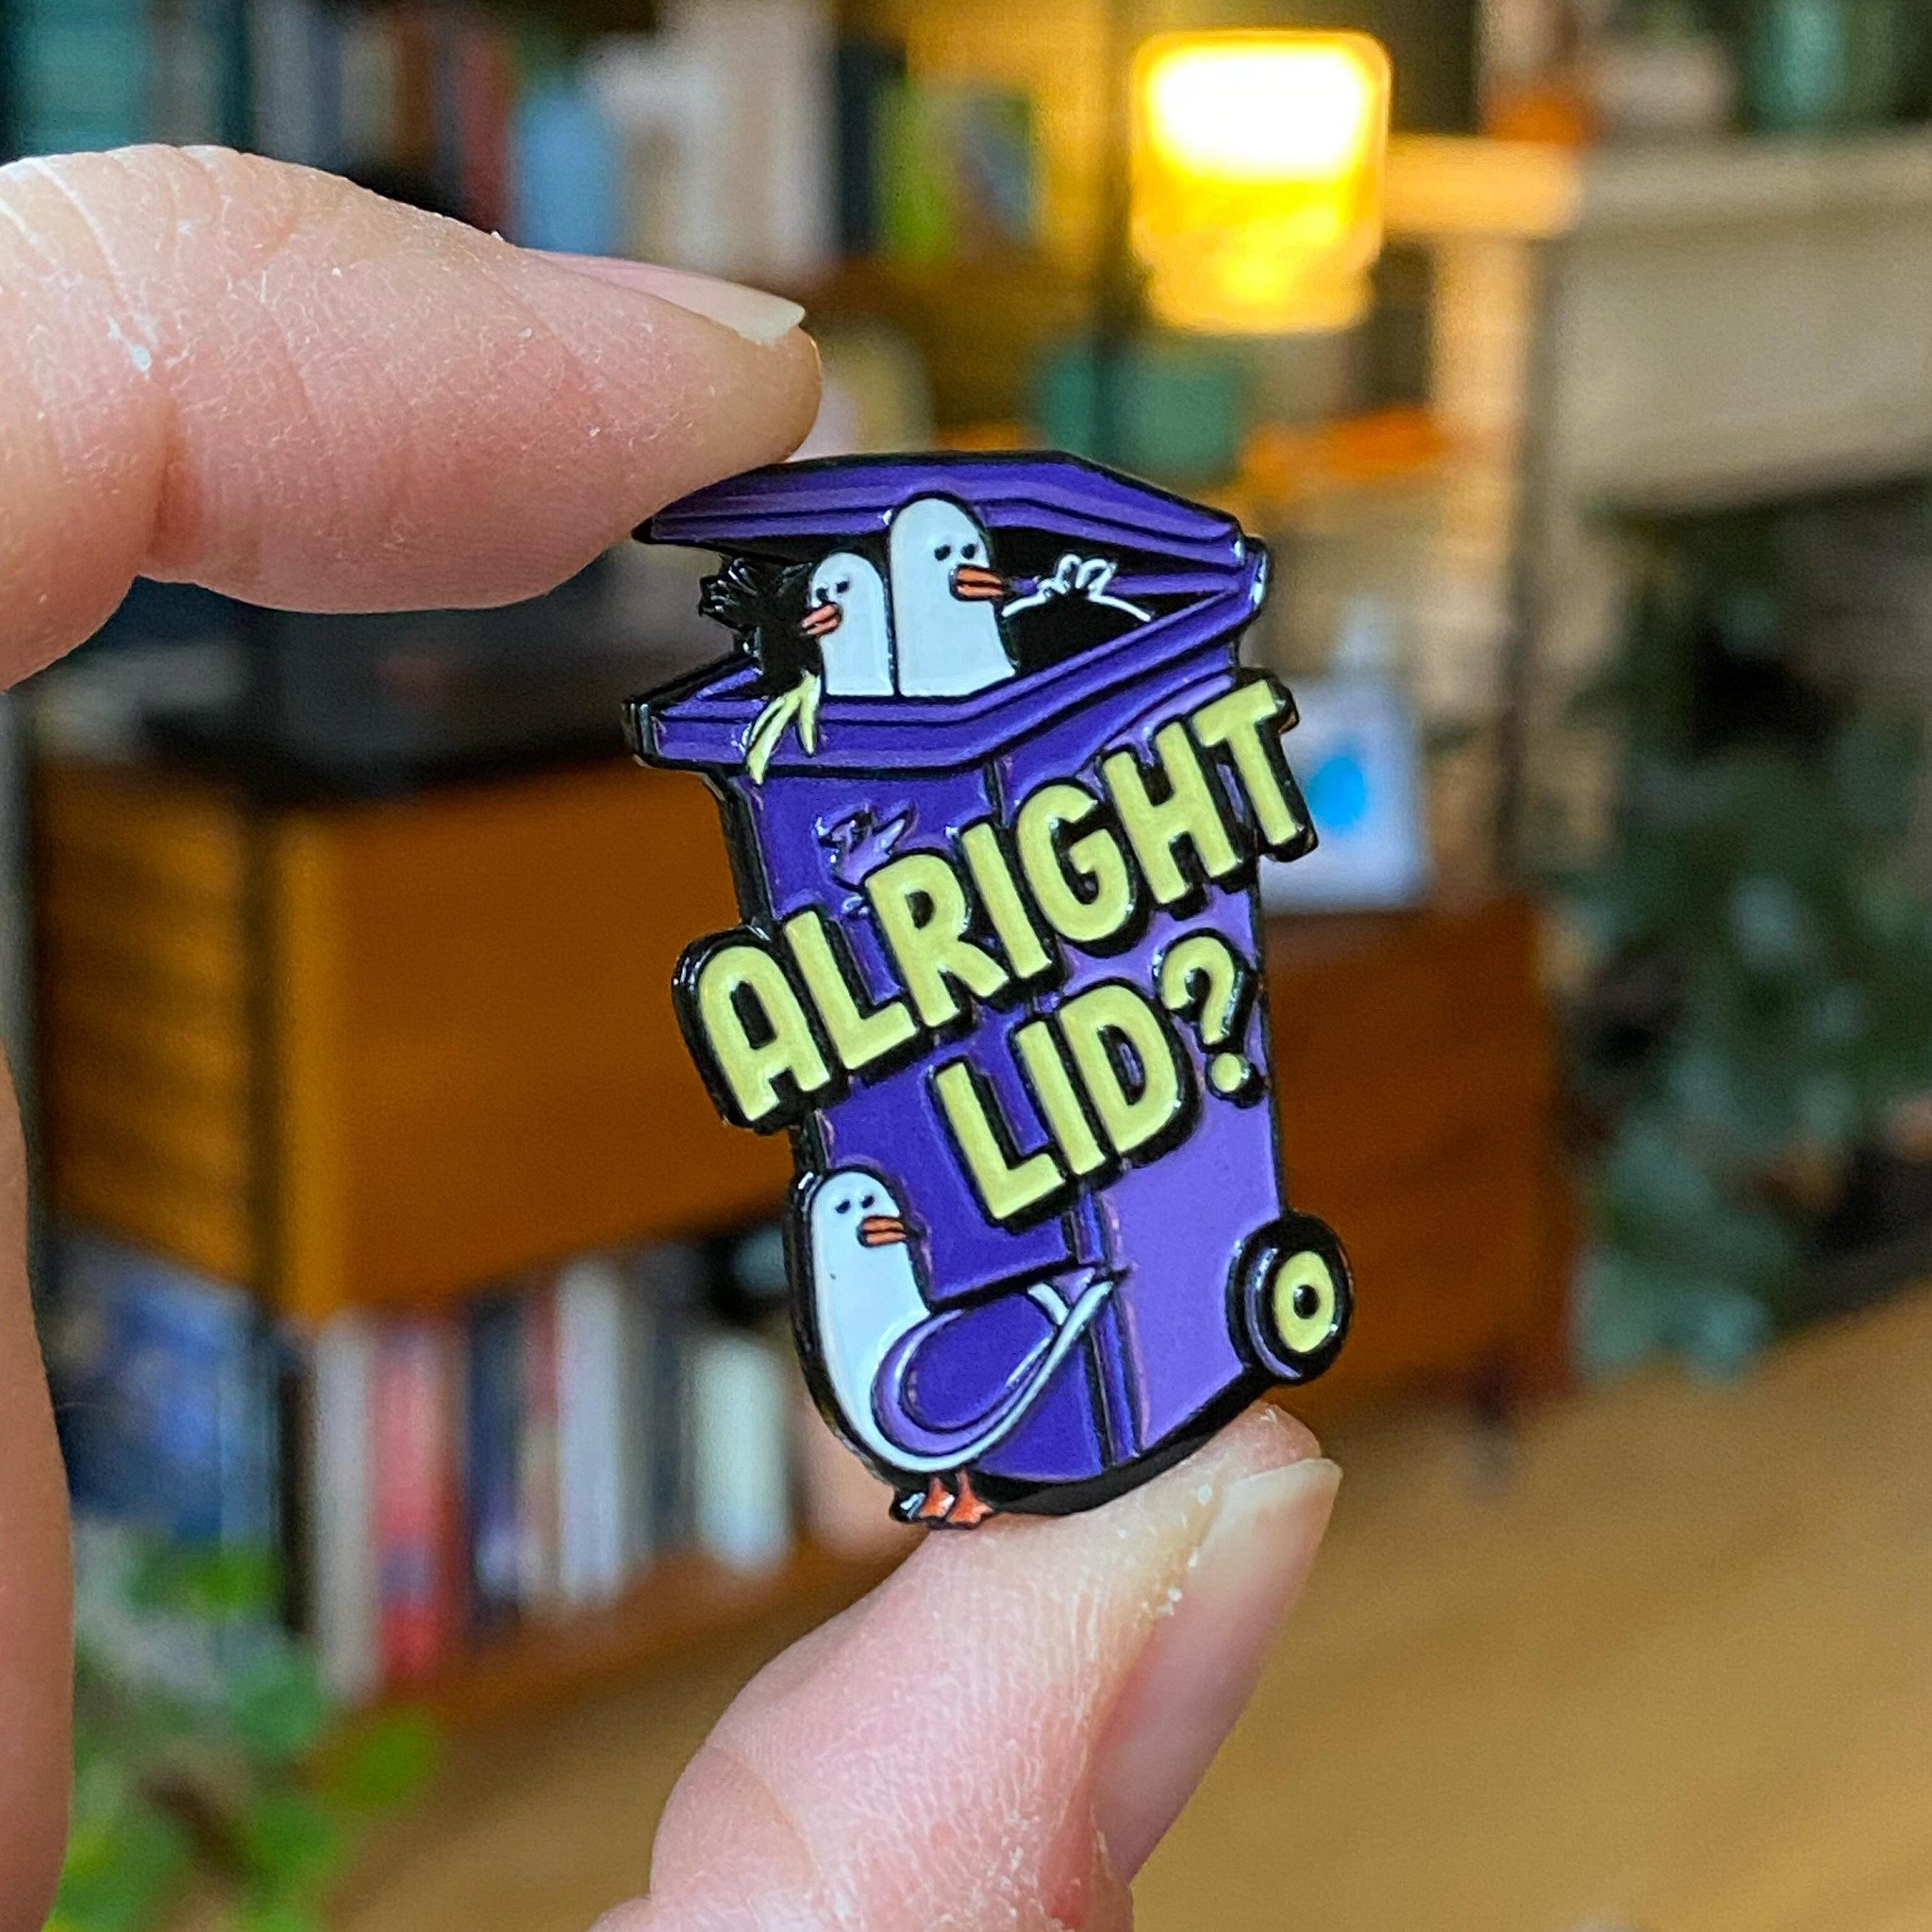 Alright lids! Check out my iconic Liverpool purple wheelie bin pin badges that arrived this week - because if your bins ain&rsquo;t purple, you ain&rsquo;t proper Scouse are ya?

I&rsquo;m really happy with how these have turned out, those little sea